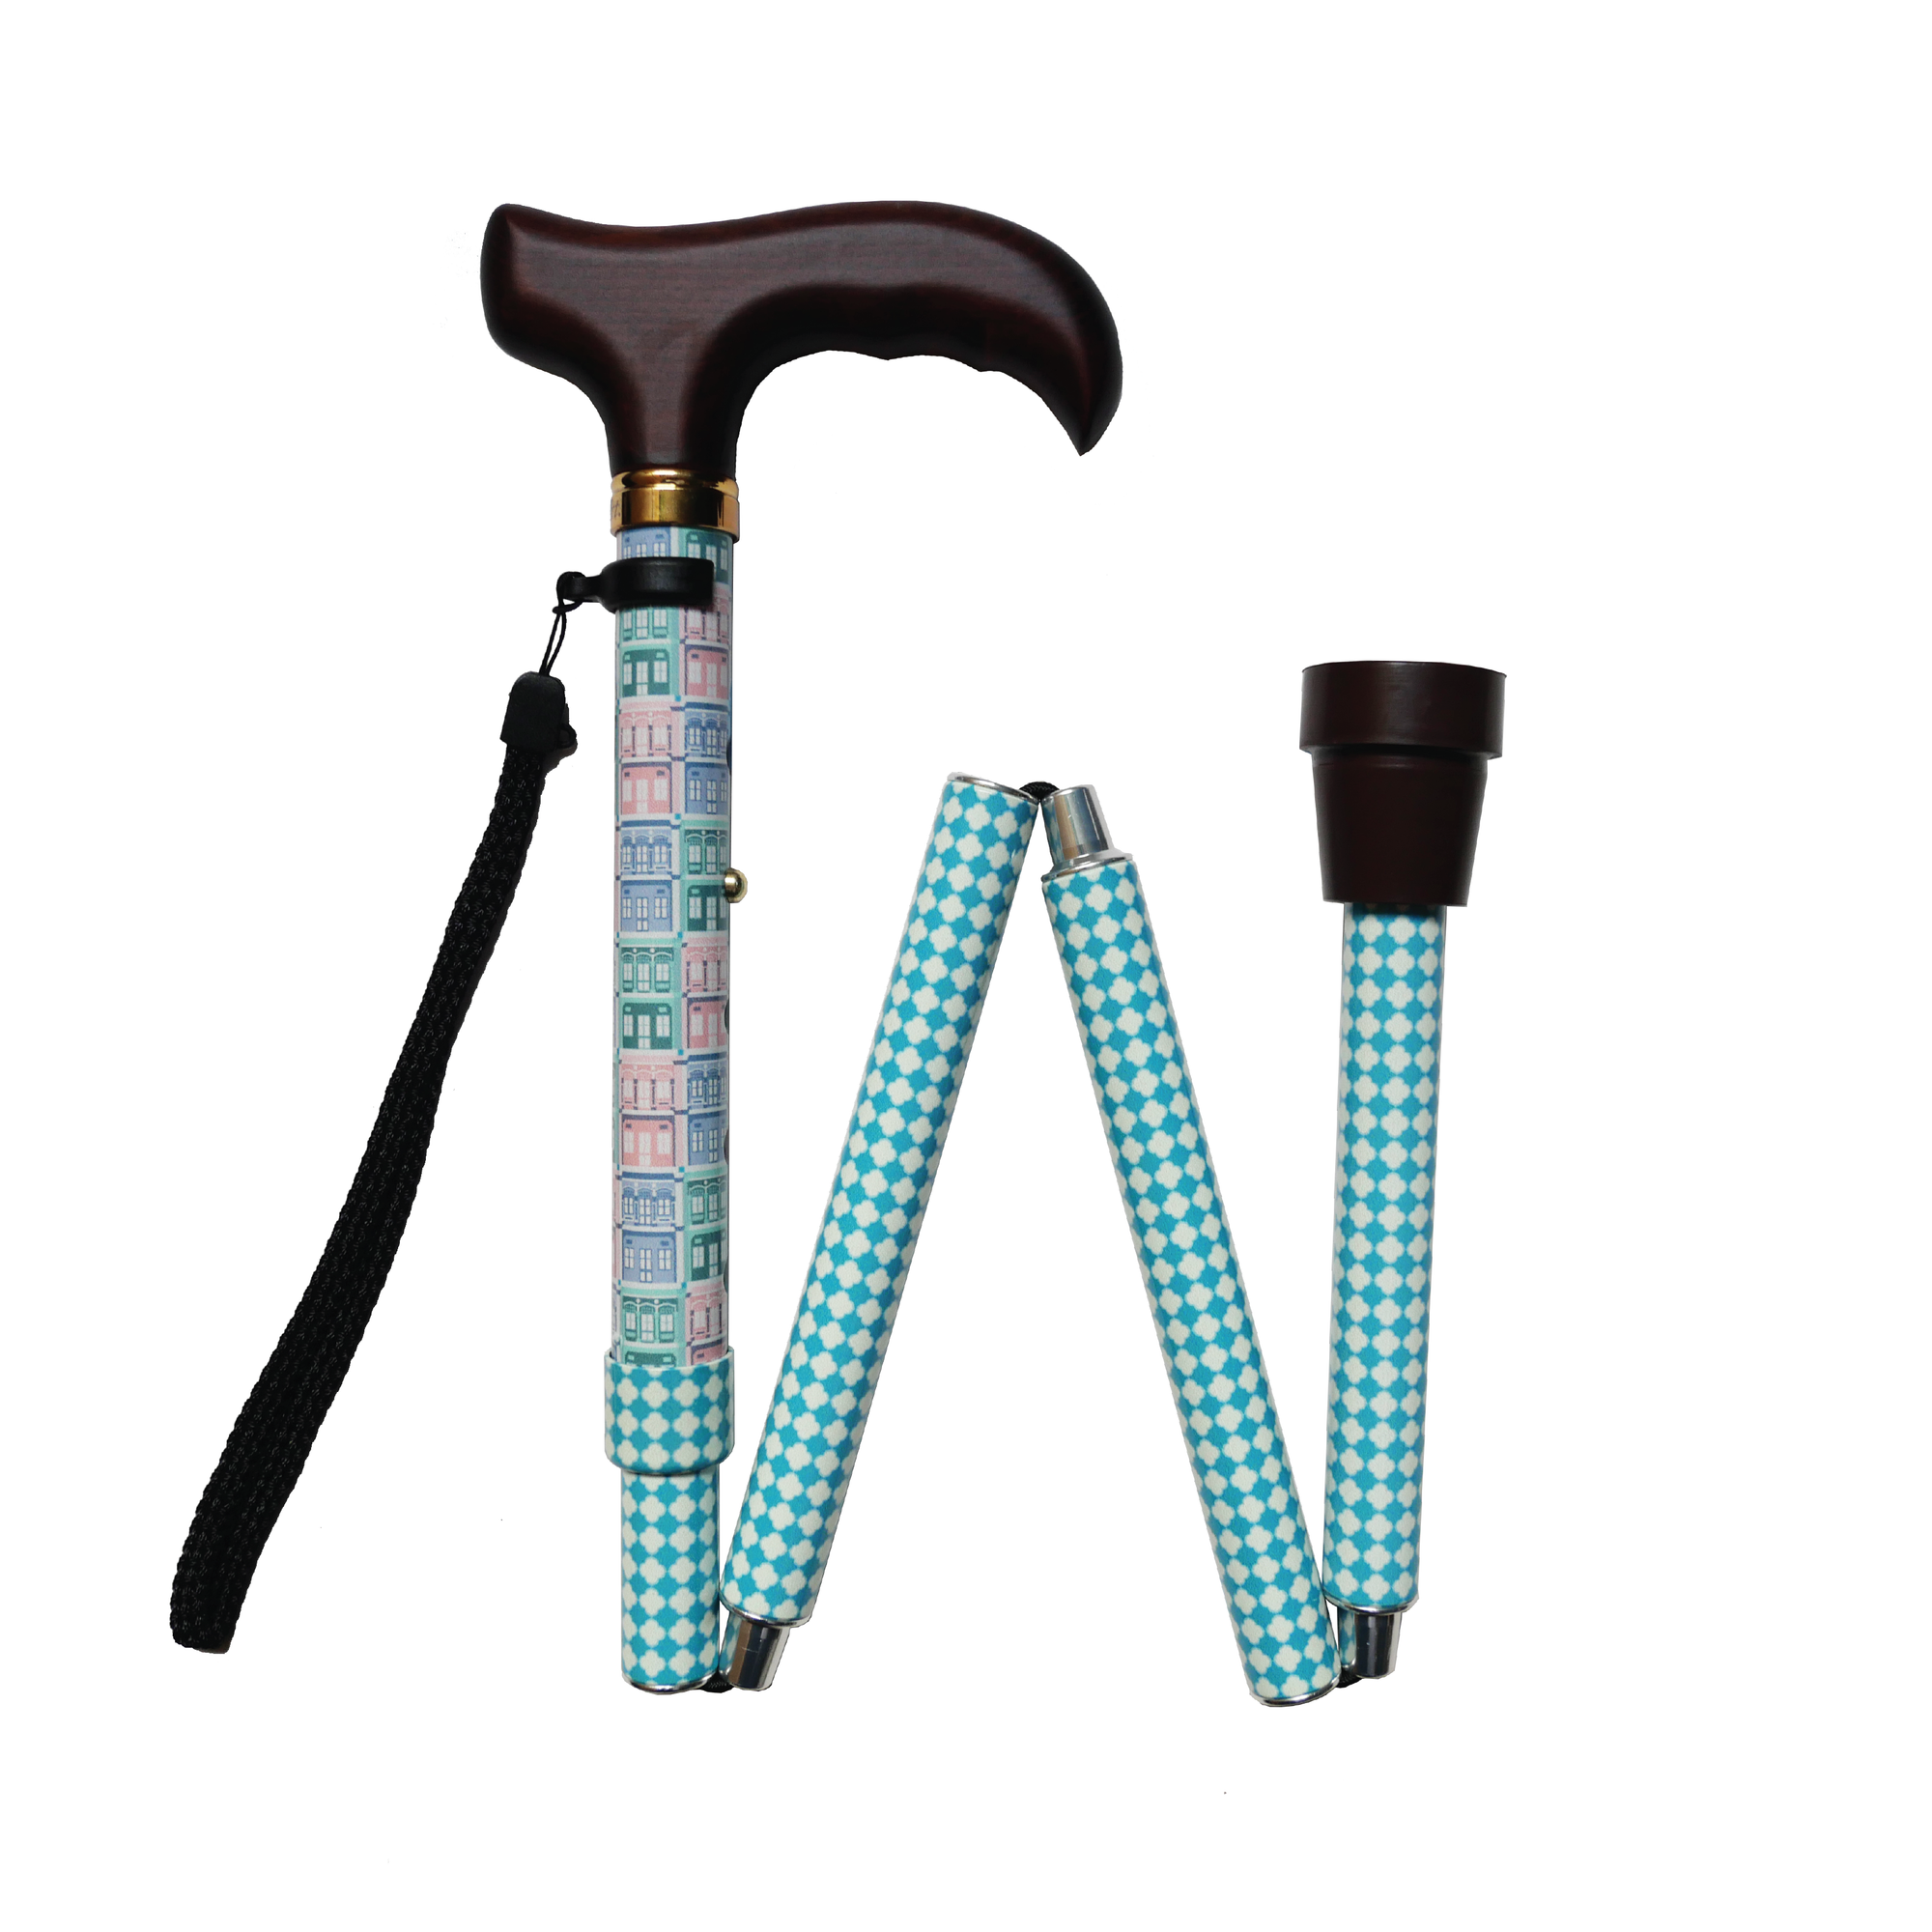 Peranakan Shophouses Adjustable & Foldable Luxe Walking Stick by Binary Style Cane: $78